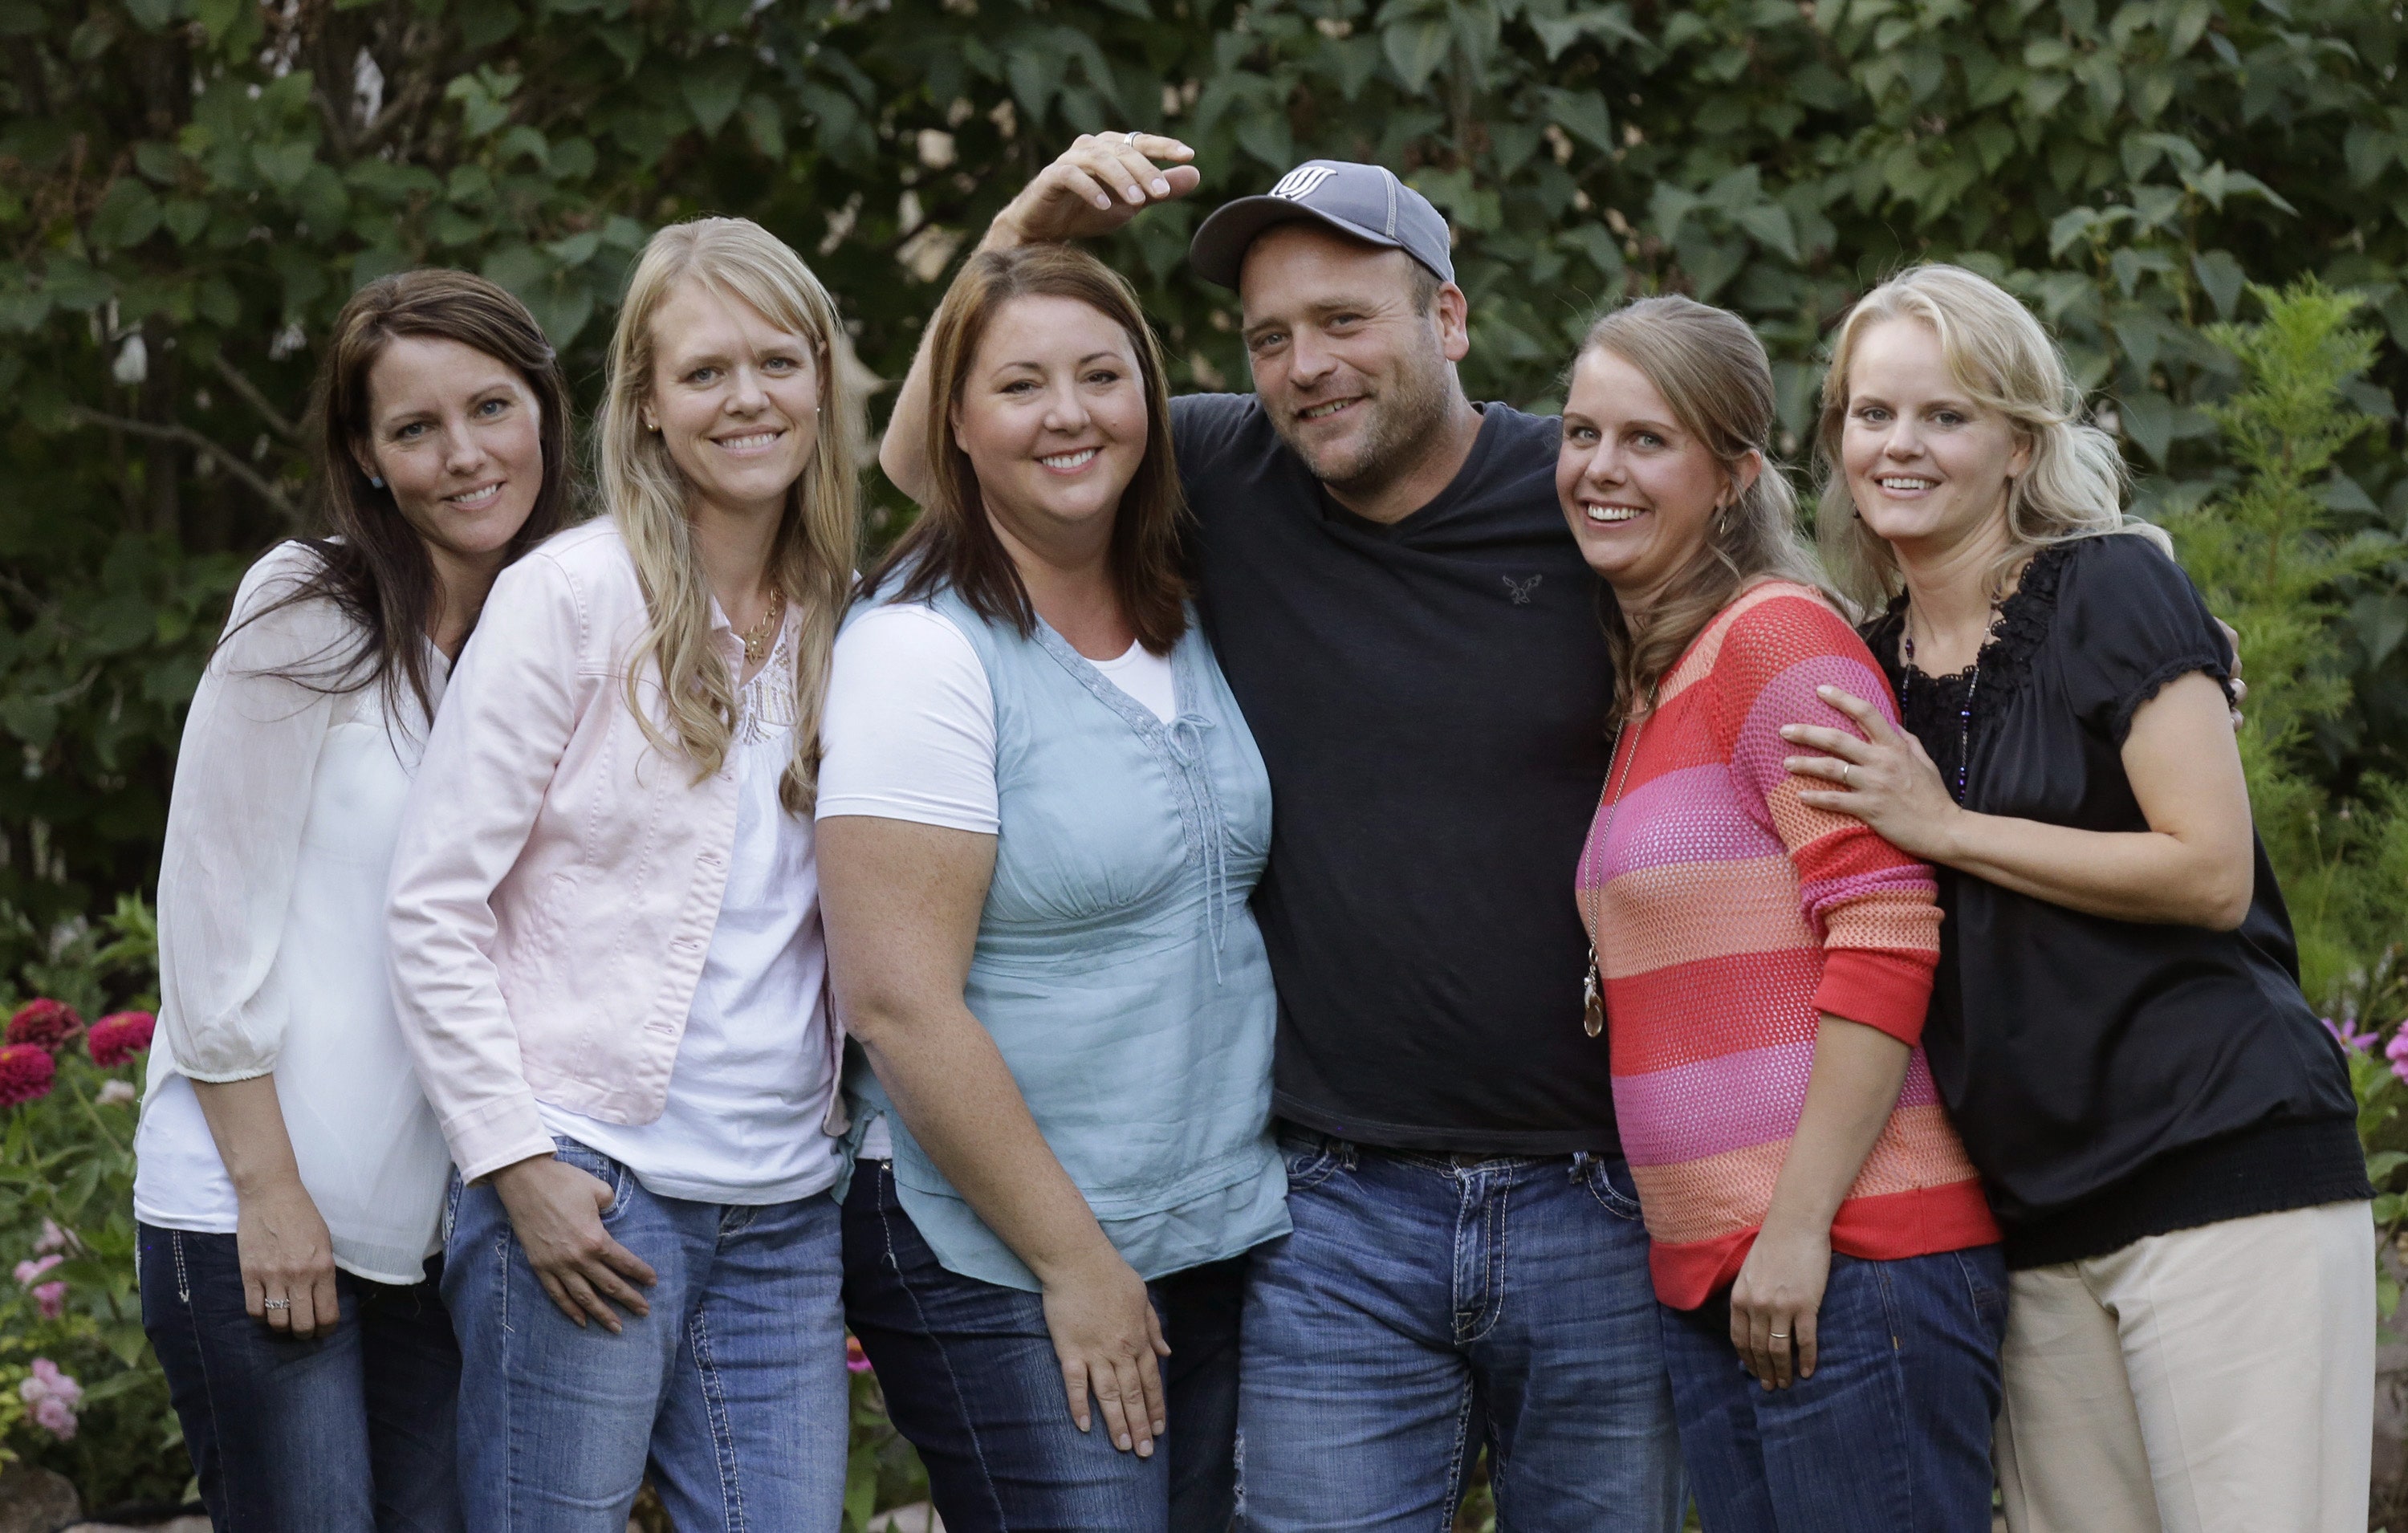 Woman on polygamy show My Five Wives accuses father of abuse Fox News